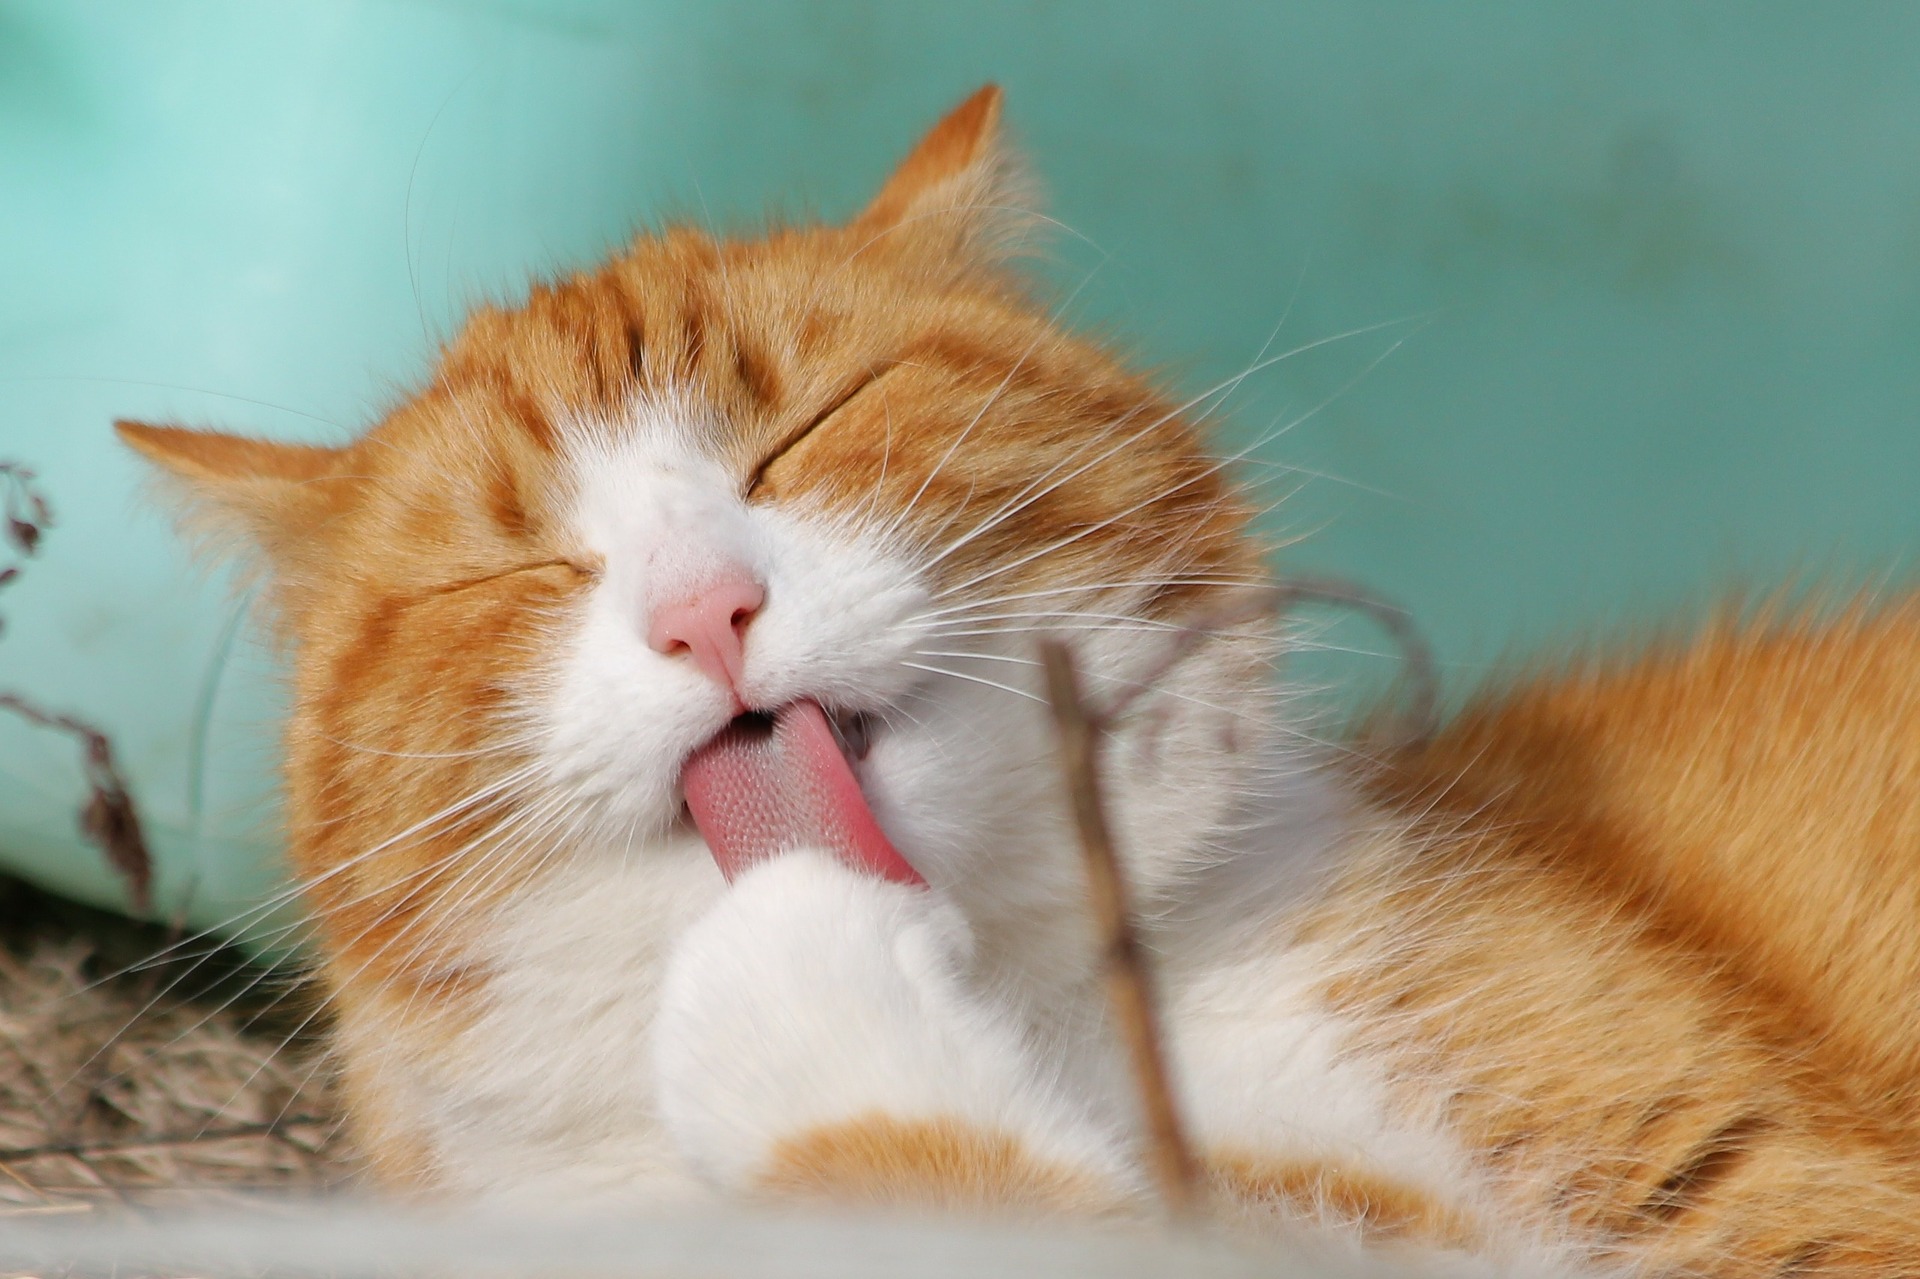 cat tooth pain - cat grooming